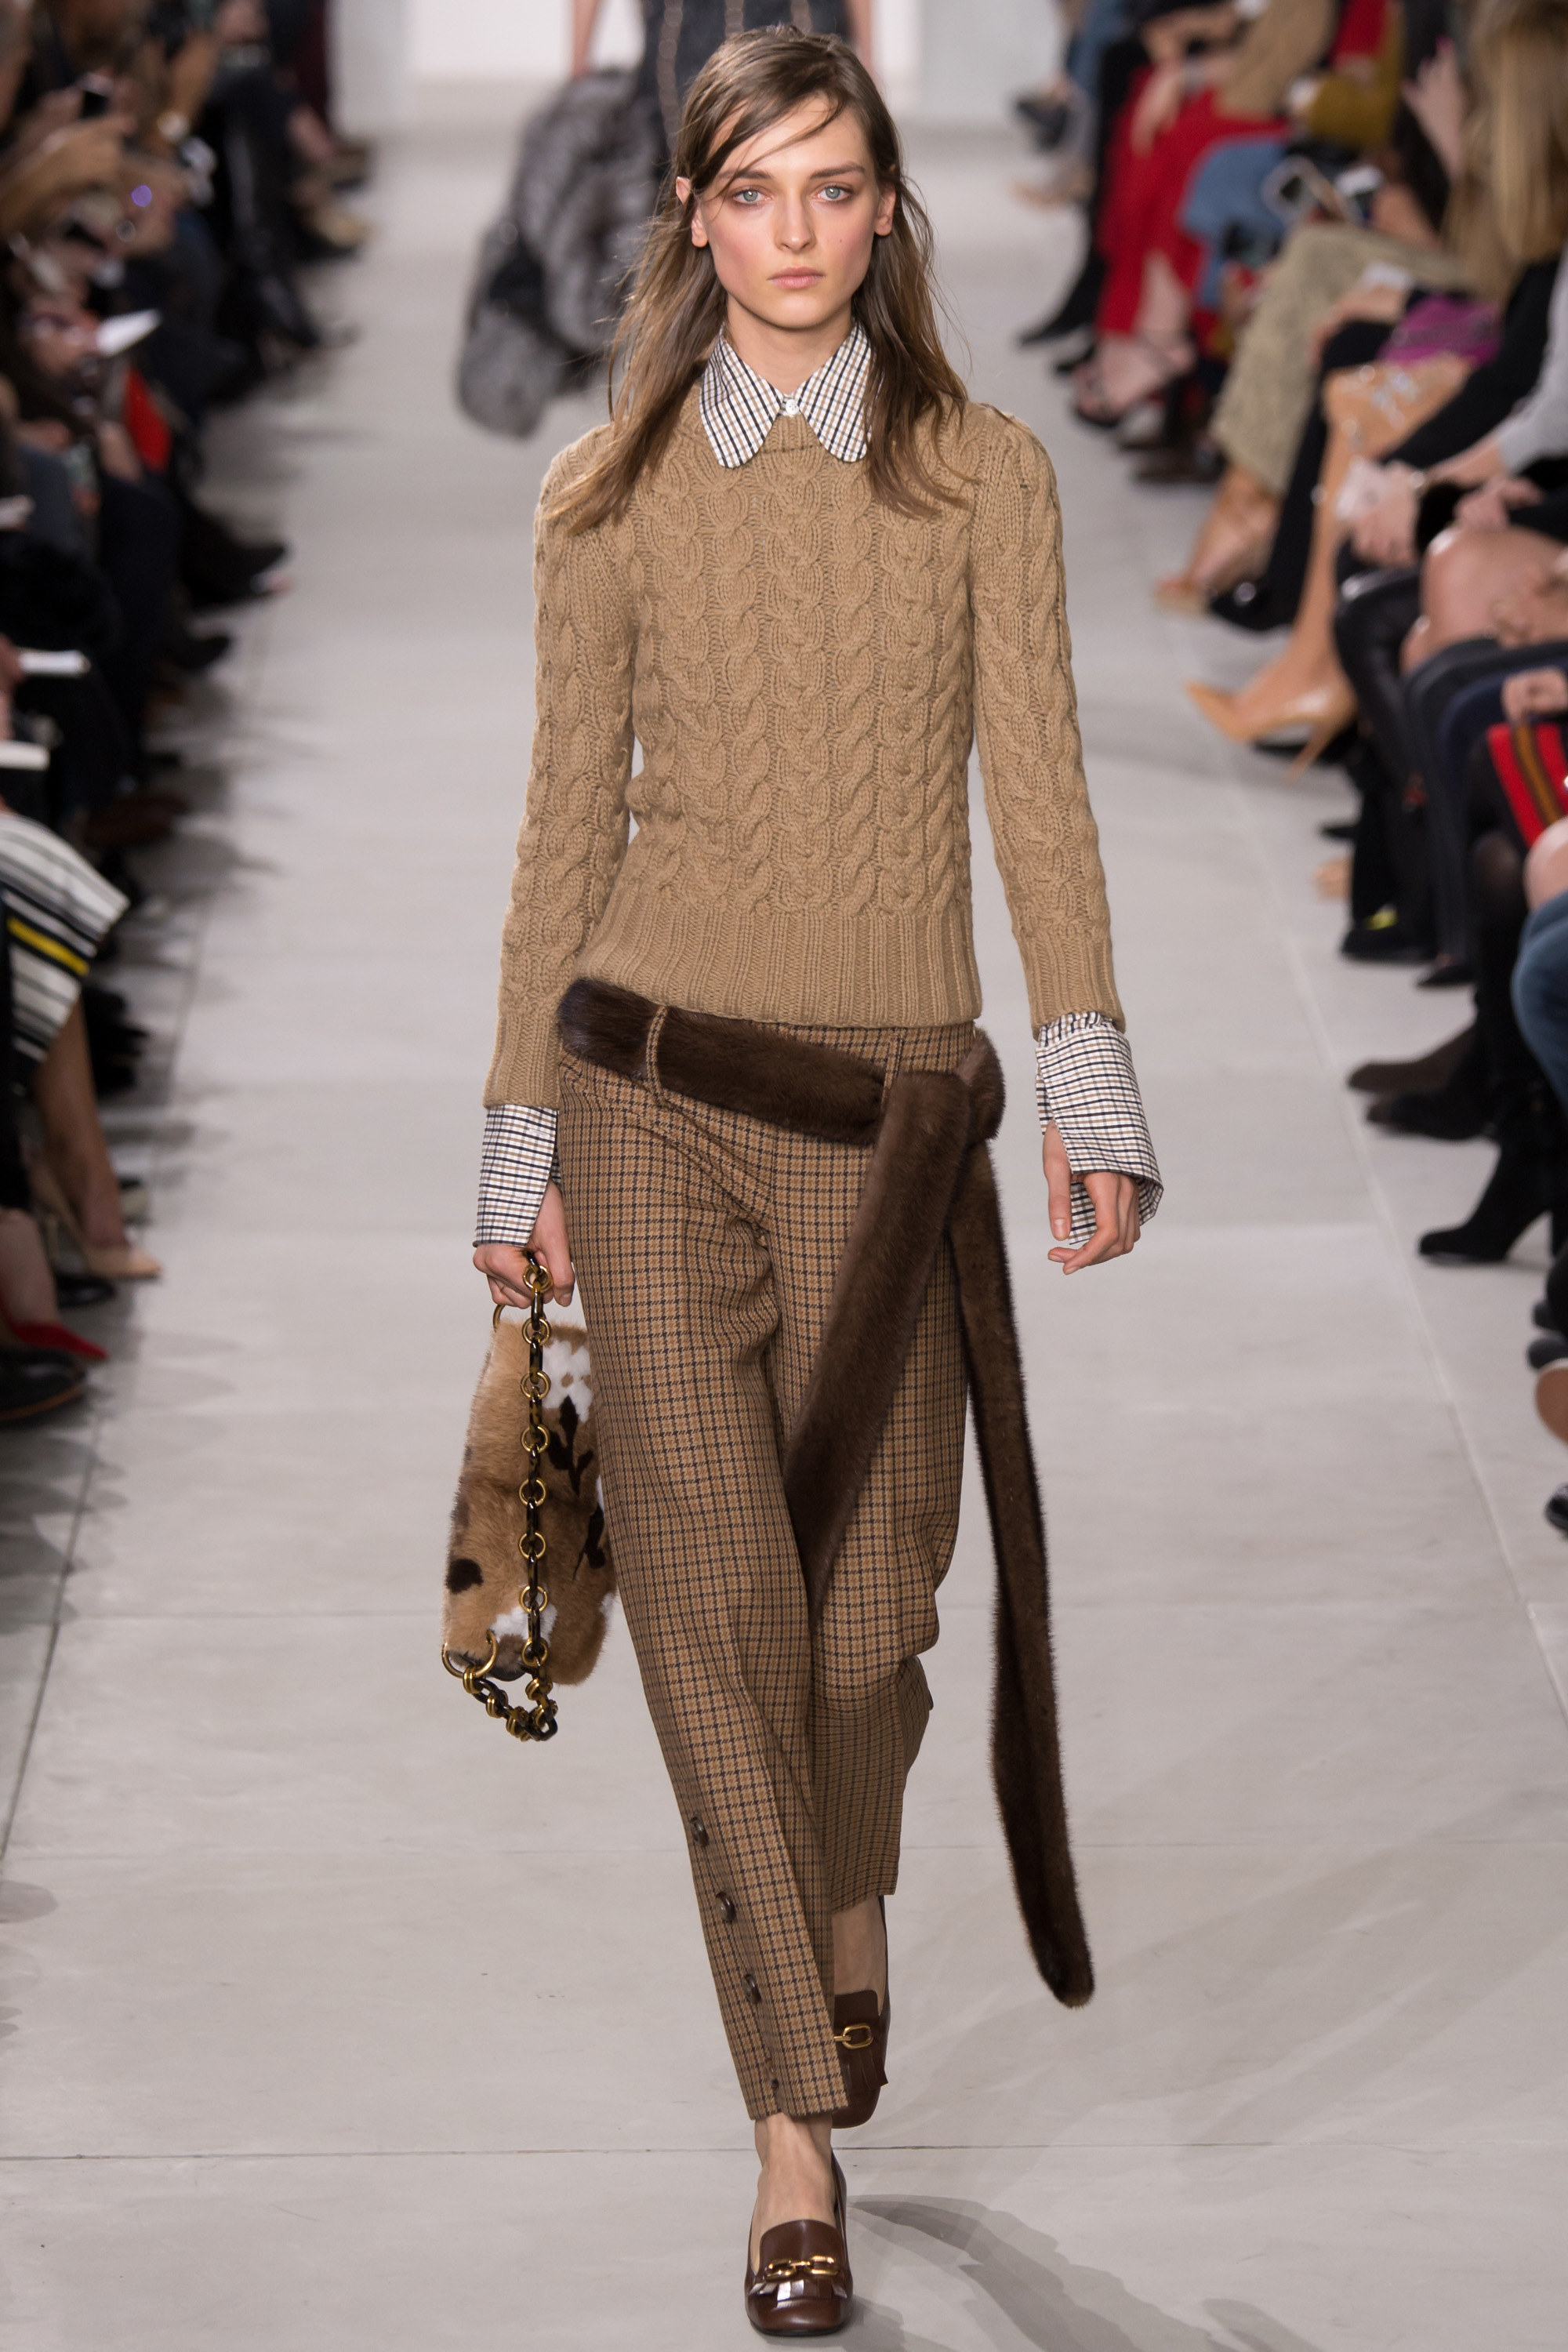 michael kors 2016 ready to wear,the impottance is balance秀场的